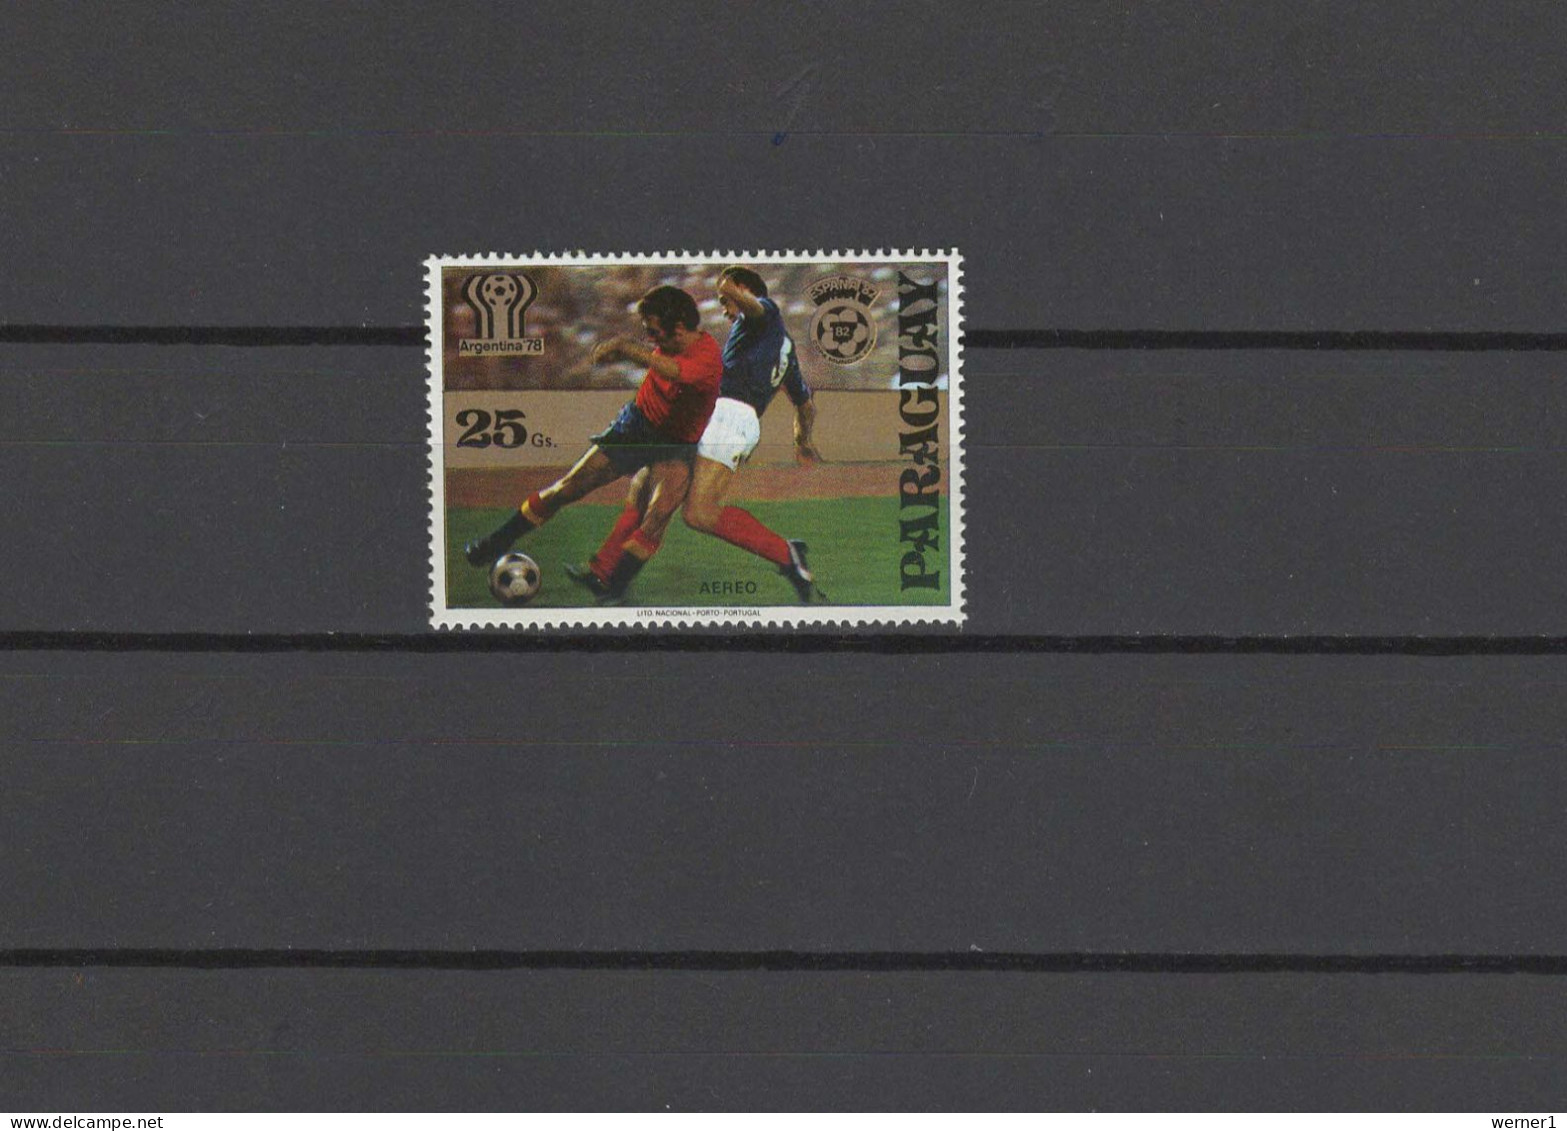 Paraguay 1979 Football Soccer World Cup Stamp MNH - 1982 – Spain